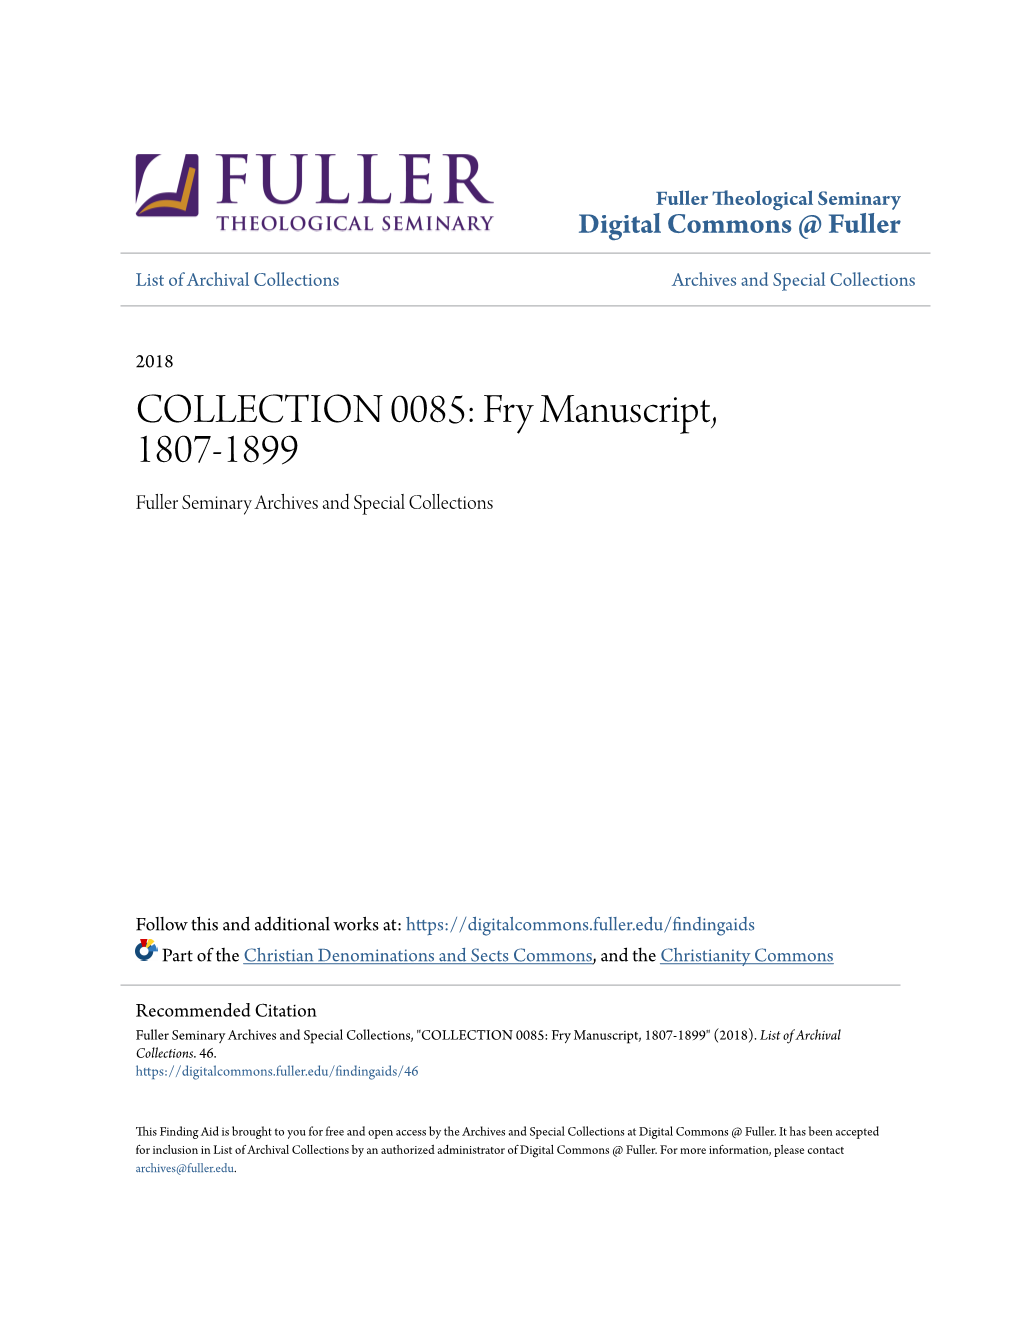 COLLECTION 0085: Fry Manuscript, 1807-1899 Fuller Seminary Archives and Special Collections